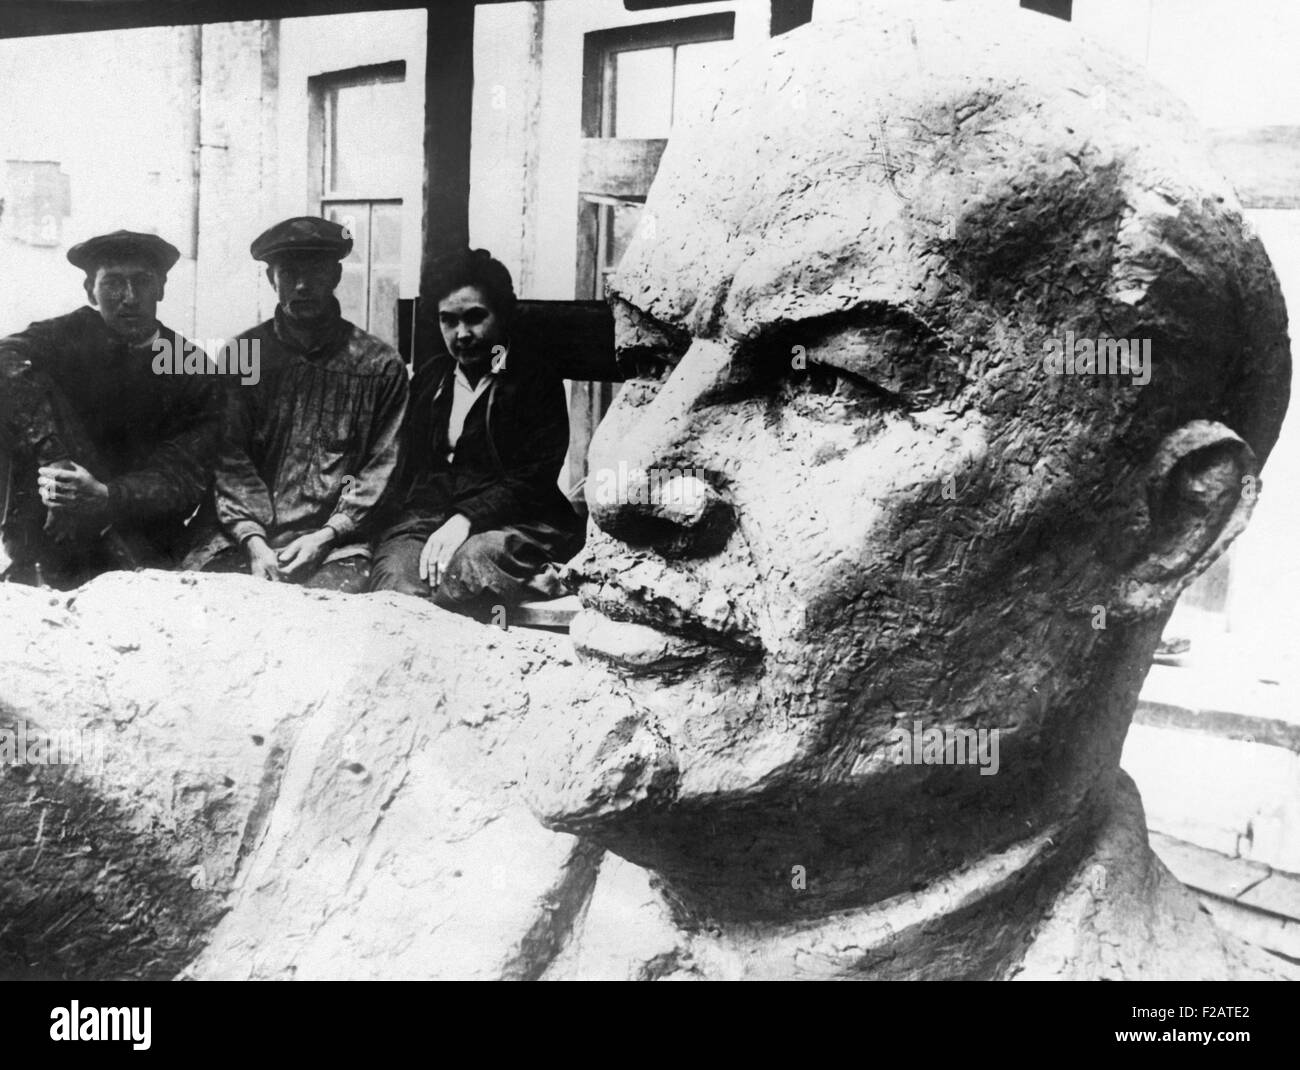 Colossal statue of Lenin, leader of the Bolshevik Revolution was unveiled in Moscow. Jan. 21, 1929. It was part of the ceremonies on the 5th anniversary of his death. (CSU 2015 11 1690) Stock Photo